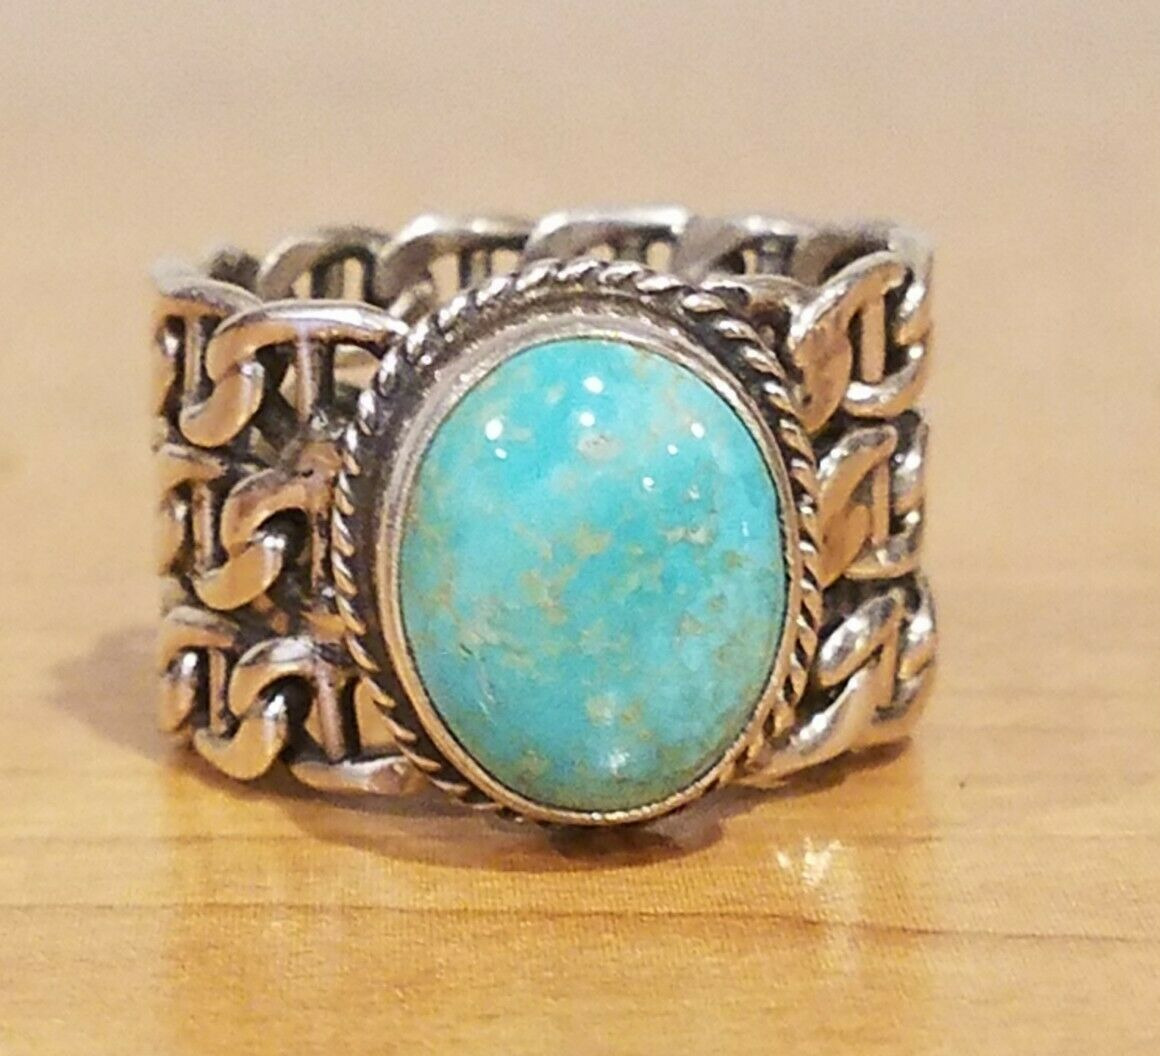 REDUCED NEW/Vintage Native American solid-link turquoise/sterling ring; 7 3/4-8